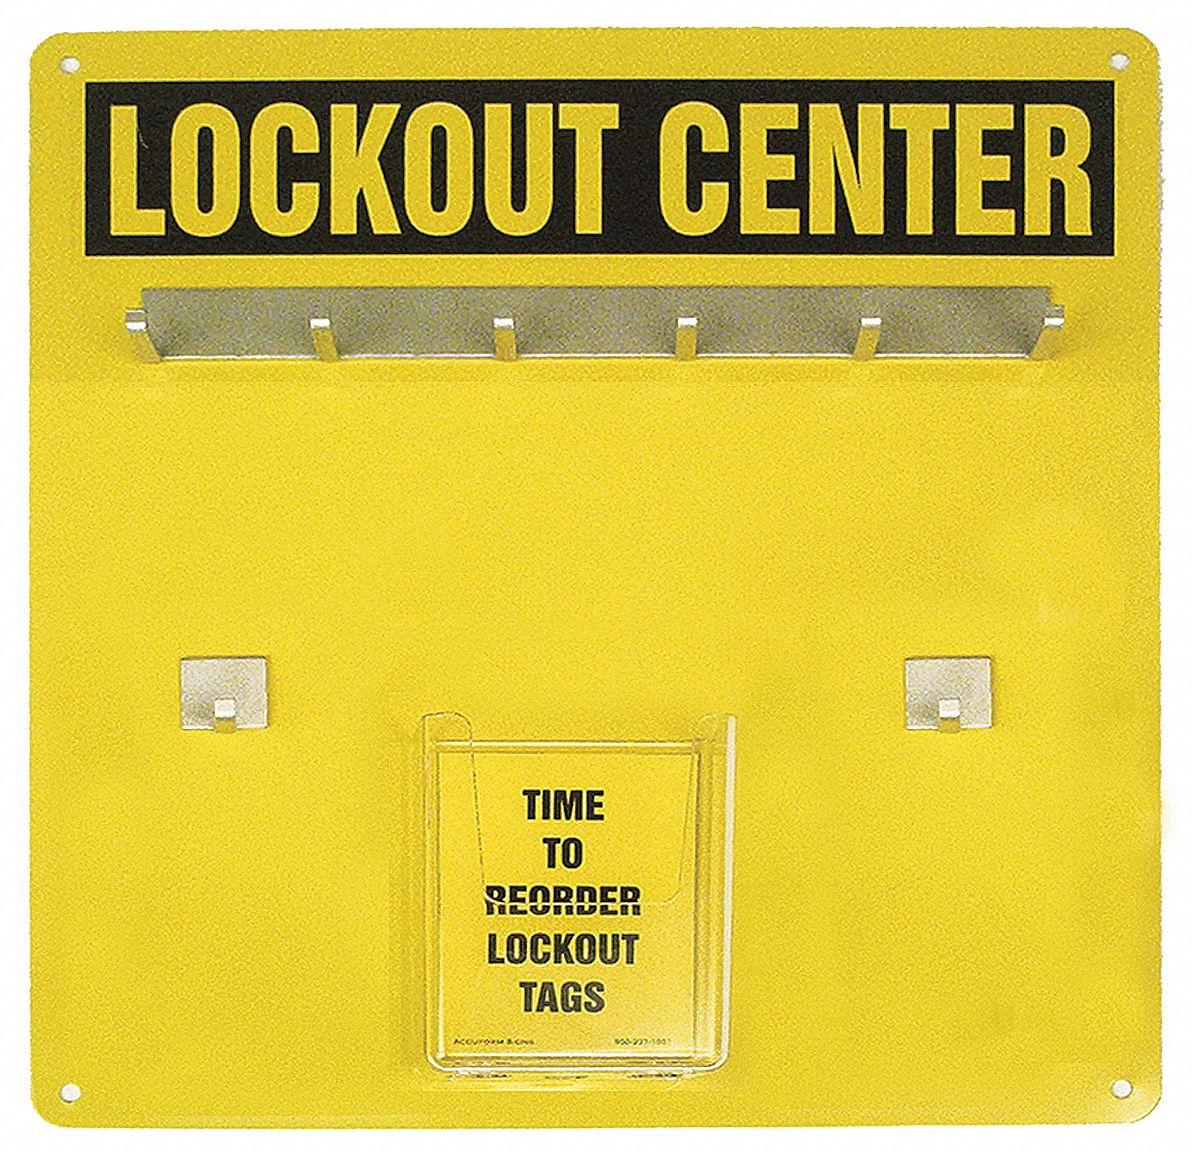 Lockout Center,Unfilled,14 In H